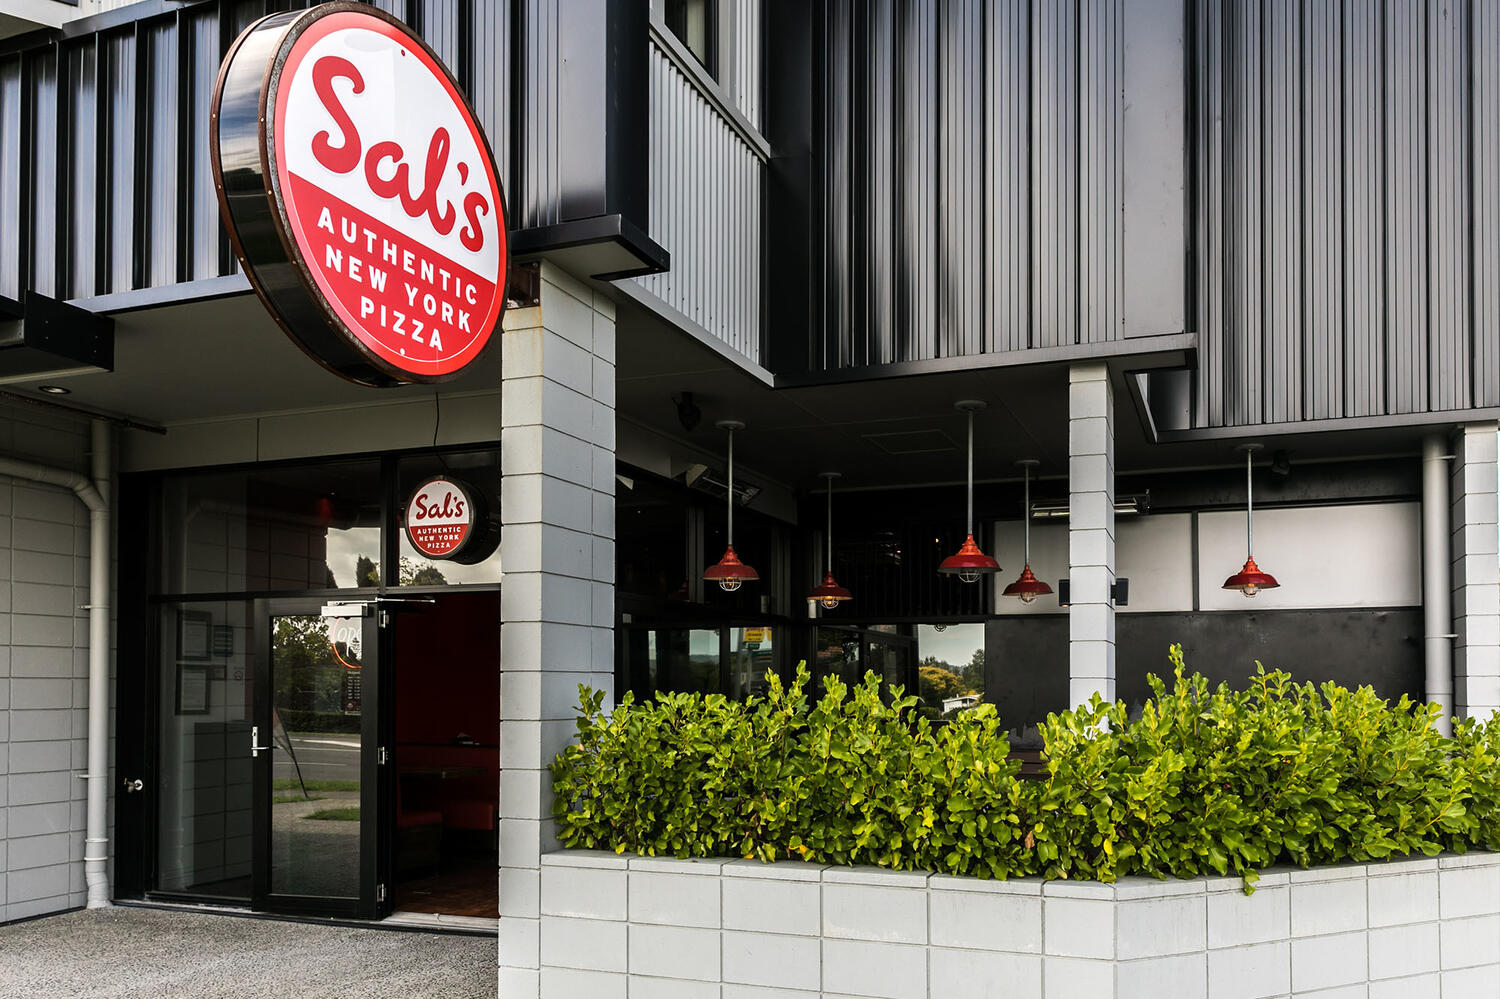 Sals Henderson SOLD by Kakapo Business Sales